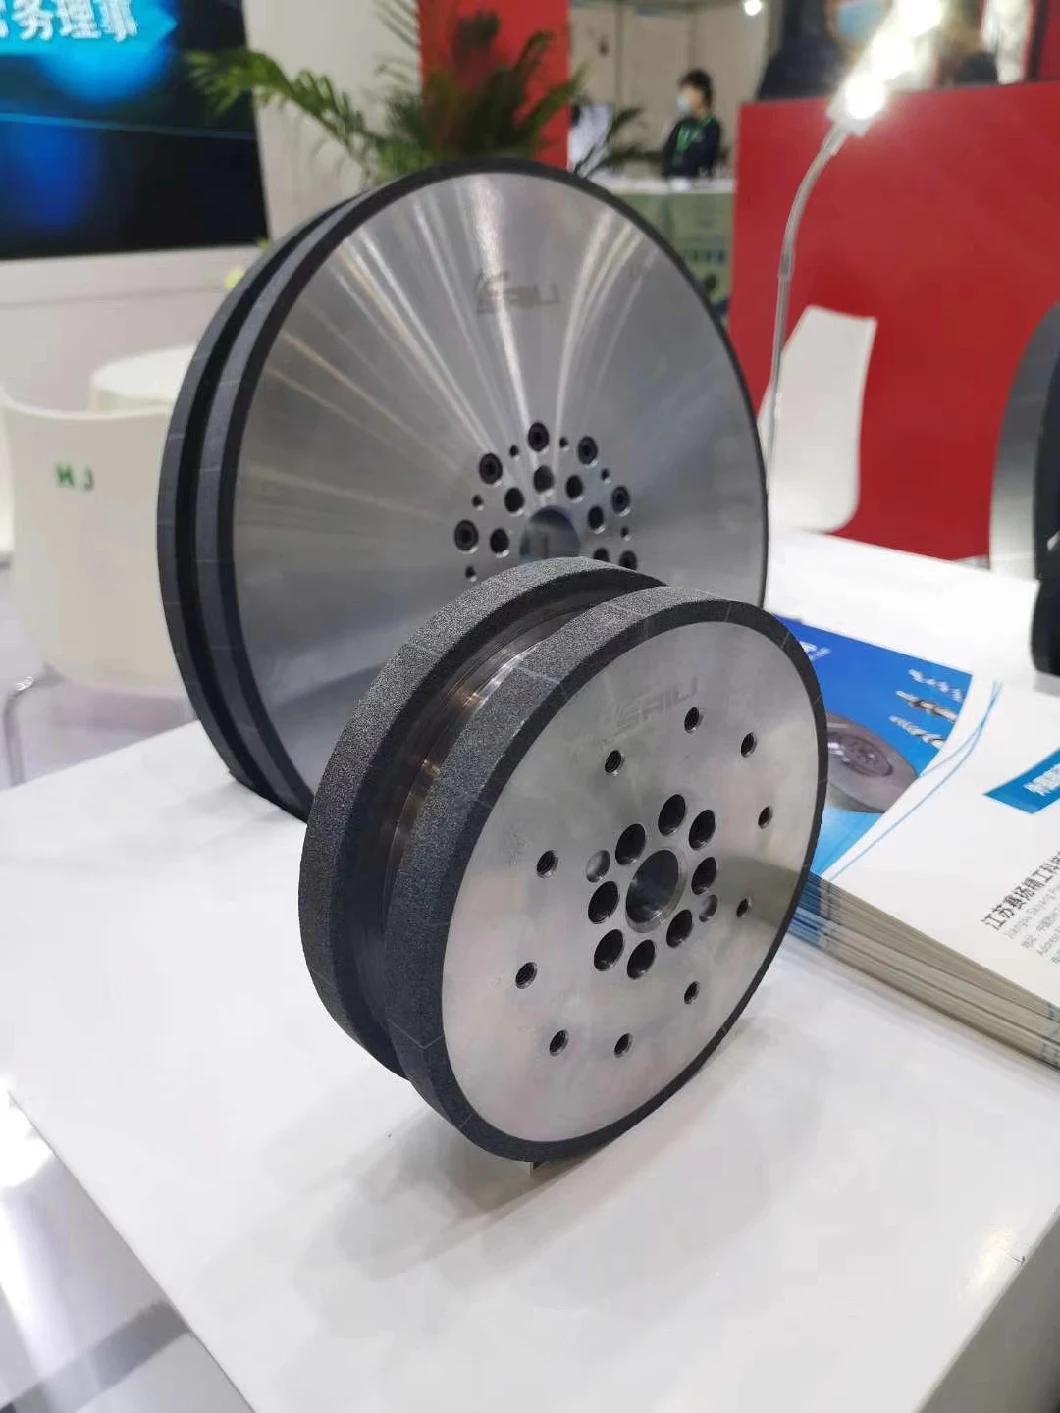 Resin, Hybrid and Metal Bond Superabrasive Wheels, Diamond and CBN Grinding Wheels 4A2 11A2 15A2 9A3 Face Wheels